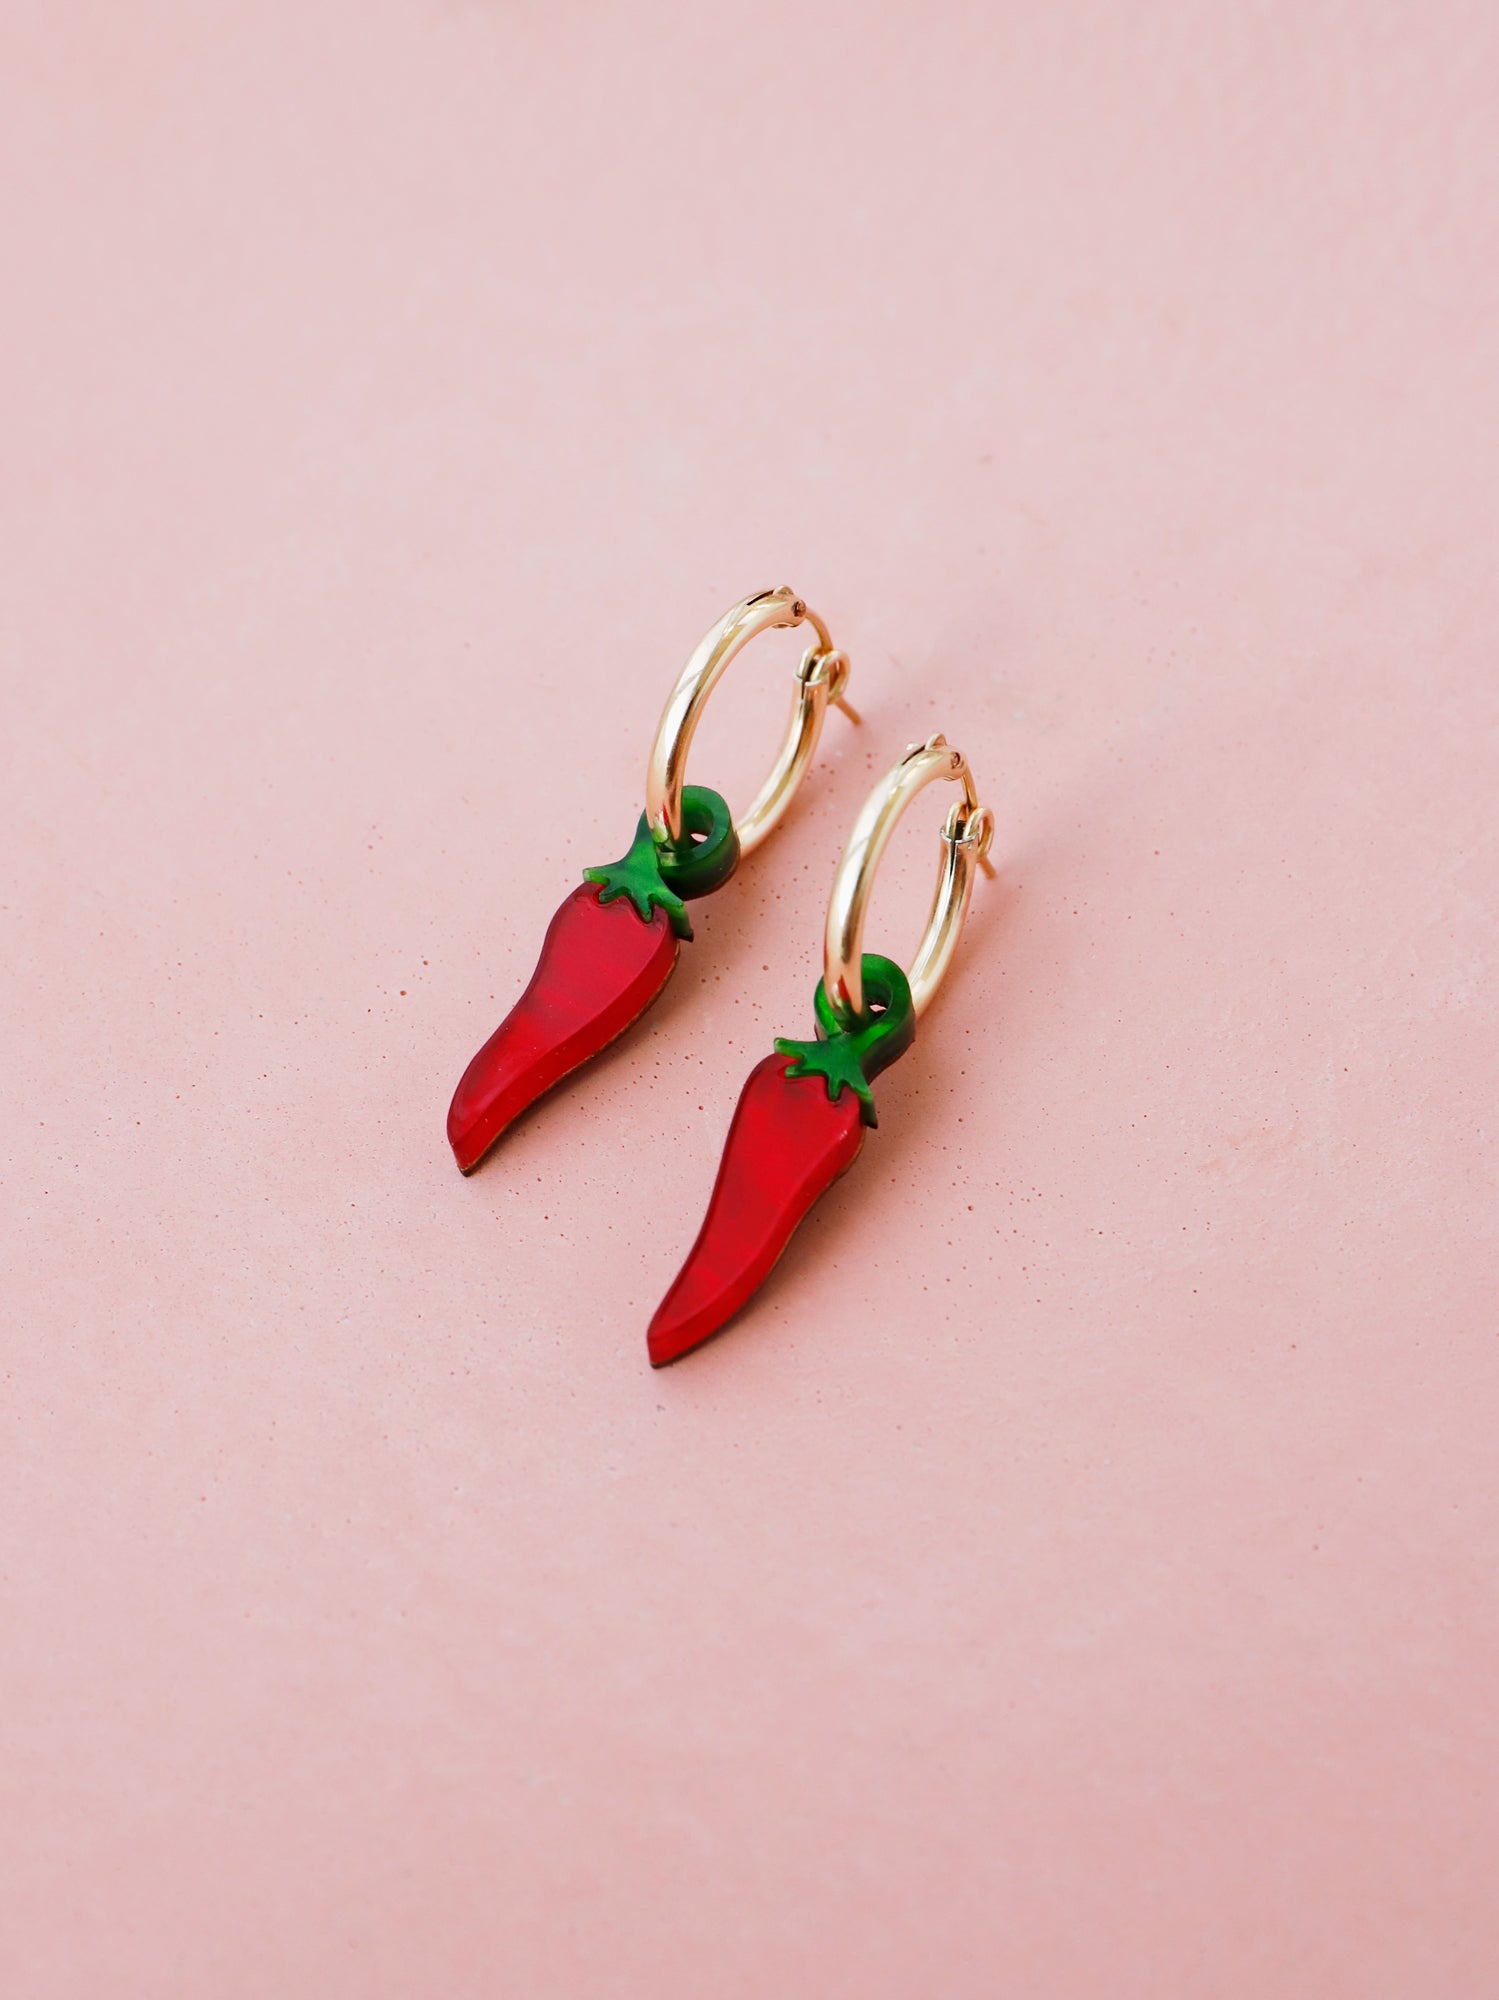 Red chilli pepper acrylic charms with optional gold-filled hoops. Handmade in London by Wolf & Moon.